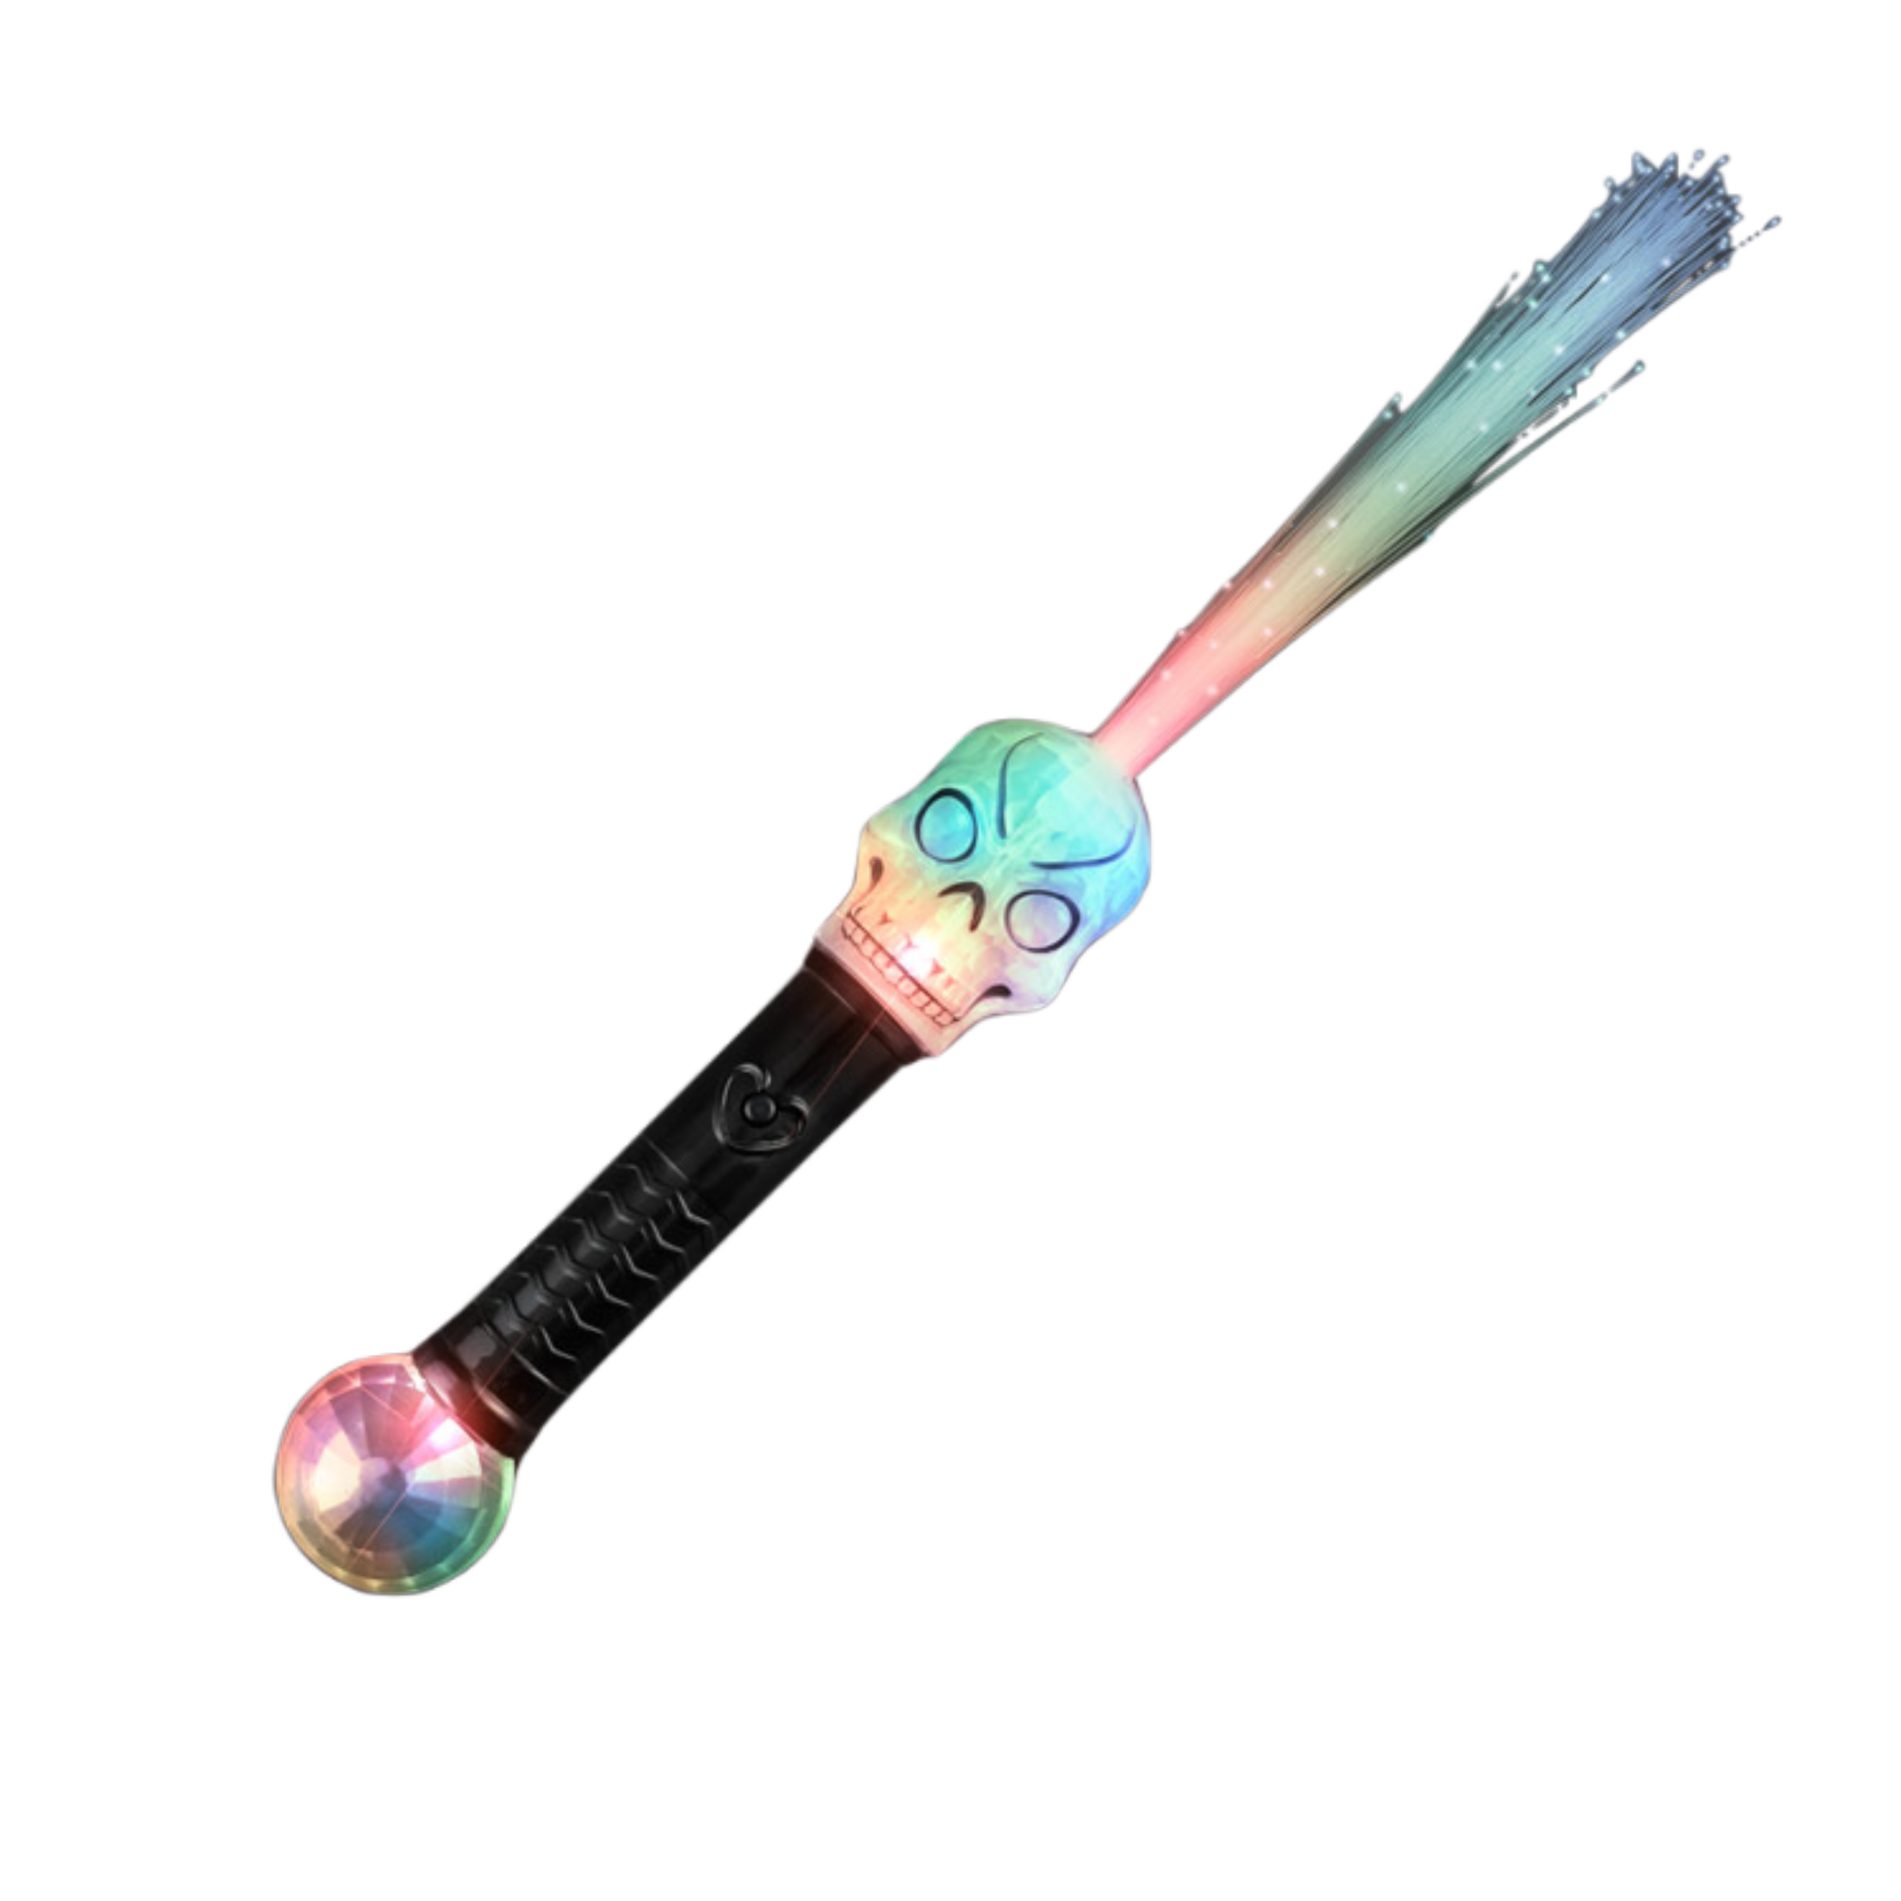 Flashing Fiber Optic Skull Wand with Prism Ball All Products